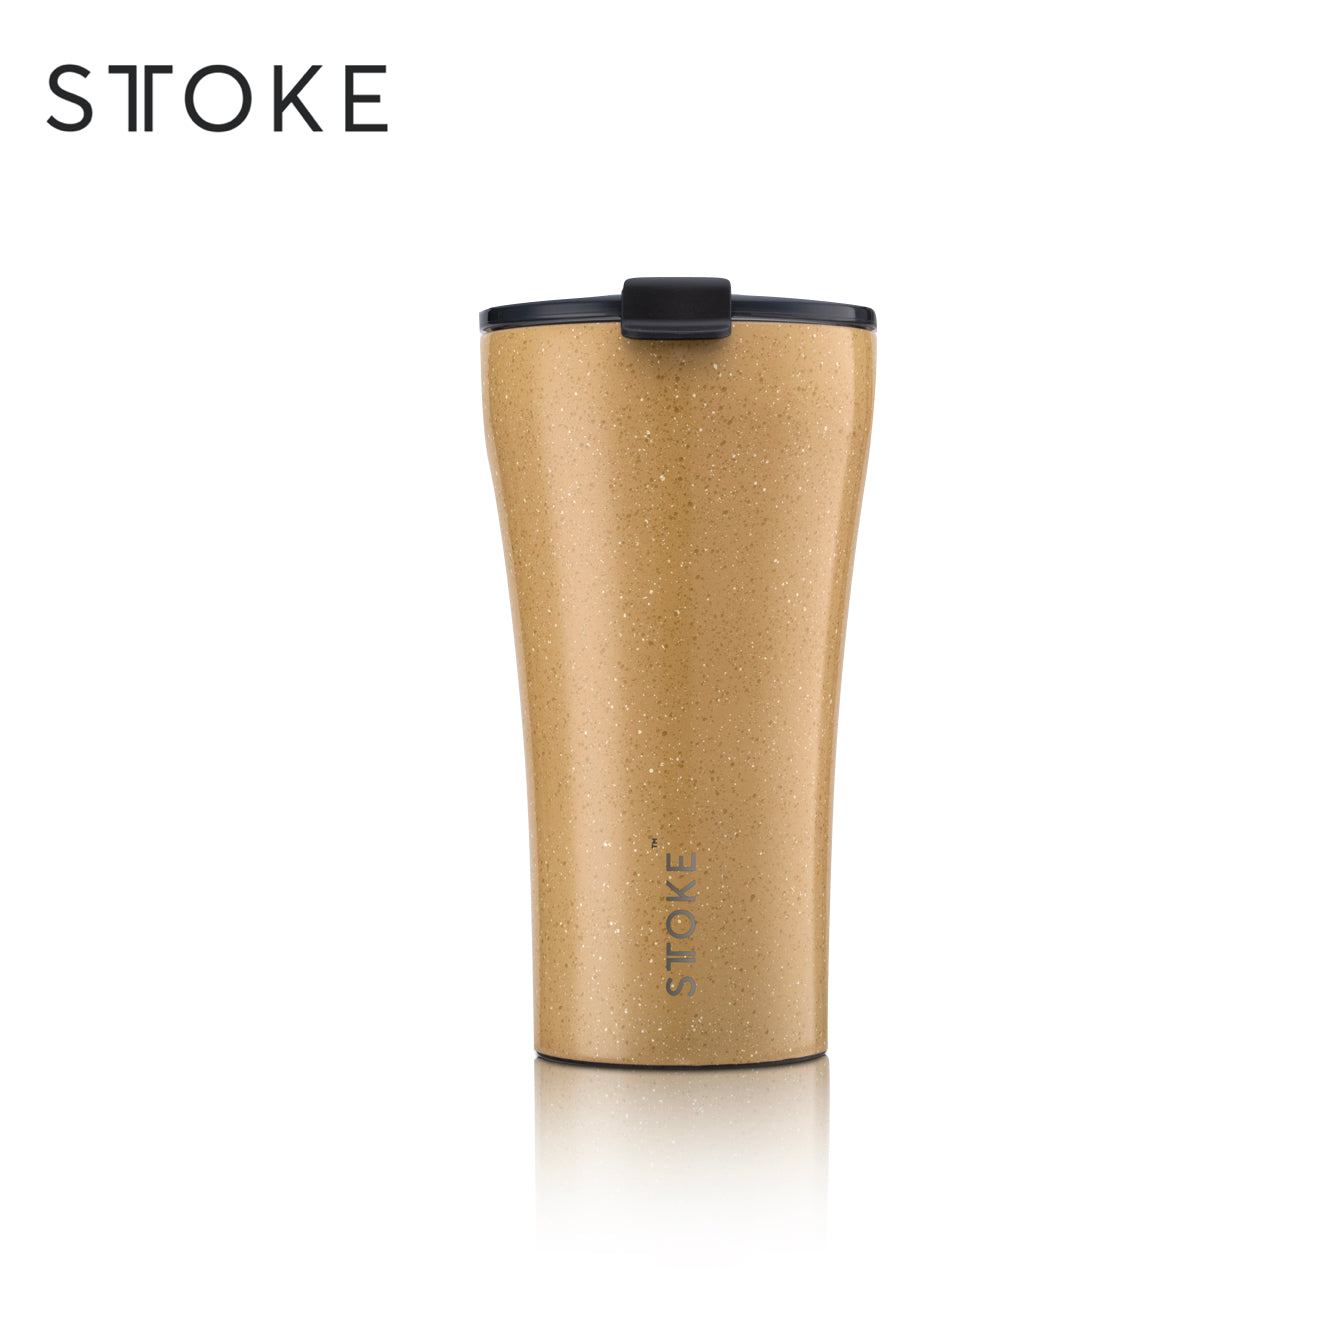 Sttoke Leakproof Ceramic Cup yellow stone